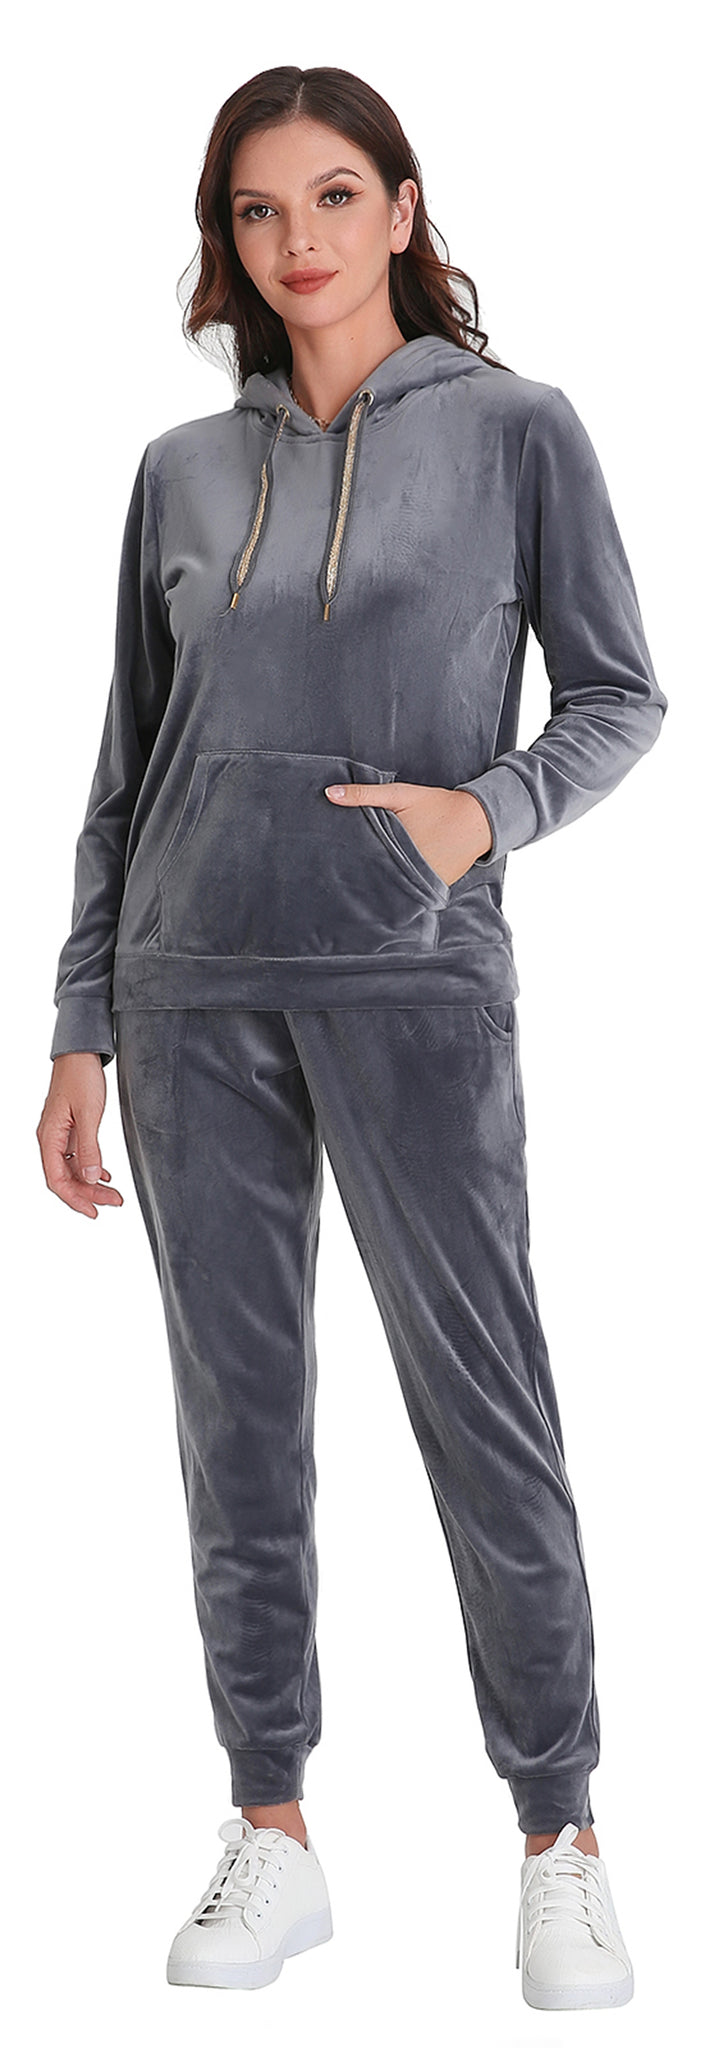 RH Sweatsuit Set Women's Velour Hoodie Sport 2P Tracksuits Outfits S-X –  Richie House USA